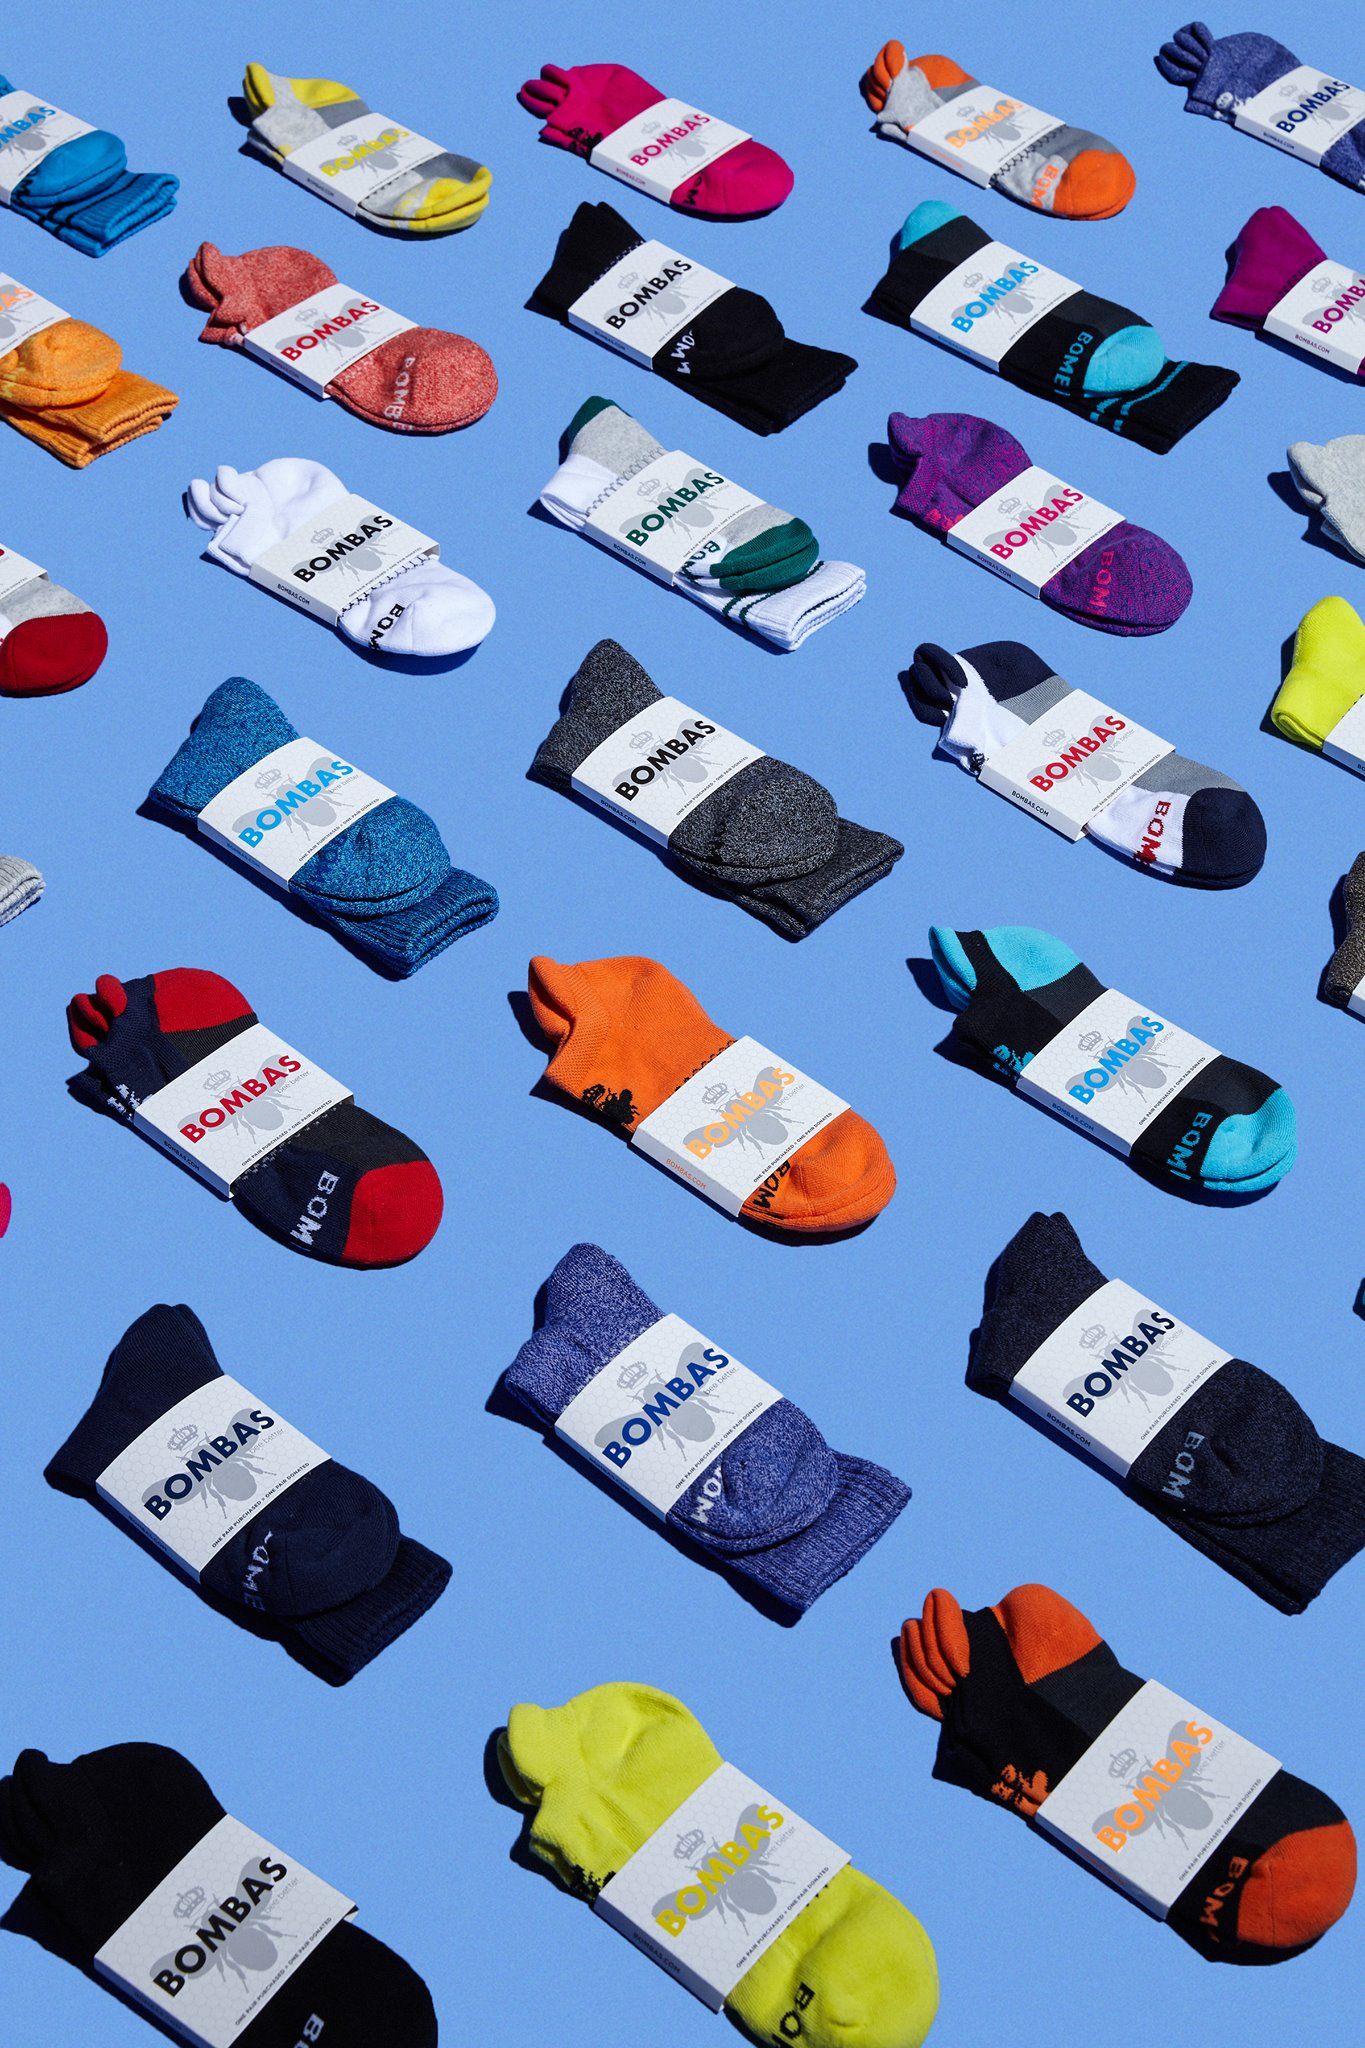 Everything You Need to Know About Bombas' Socks